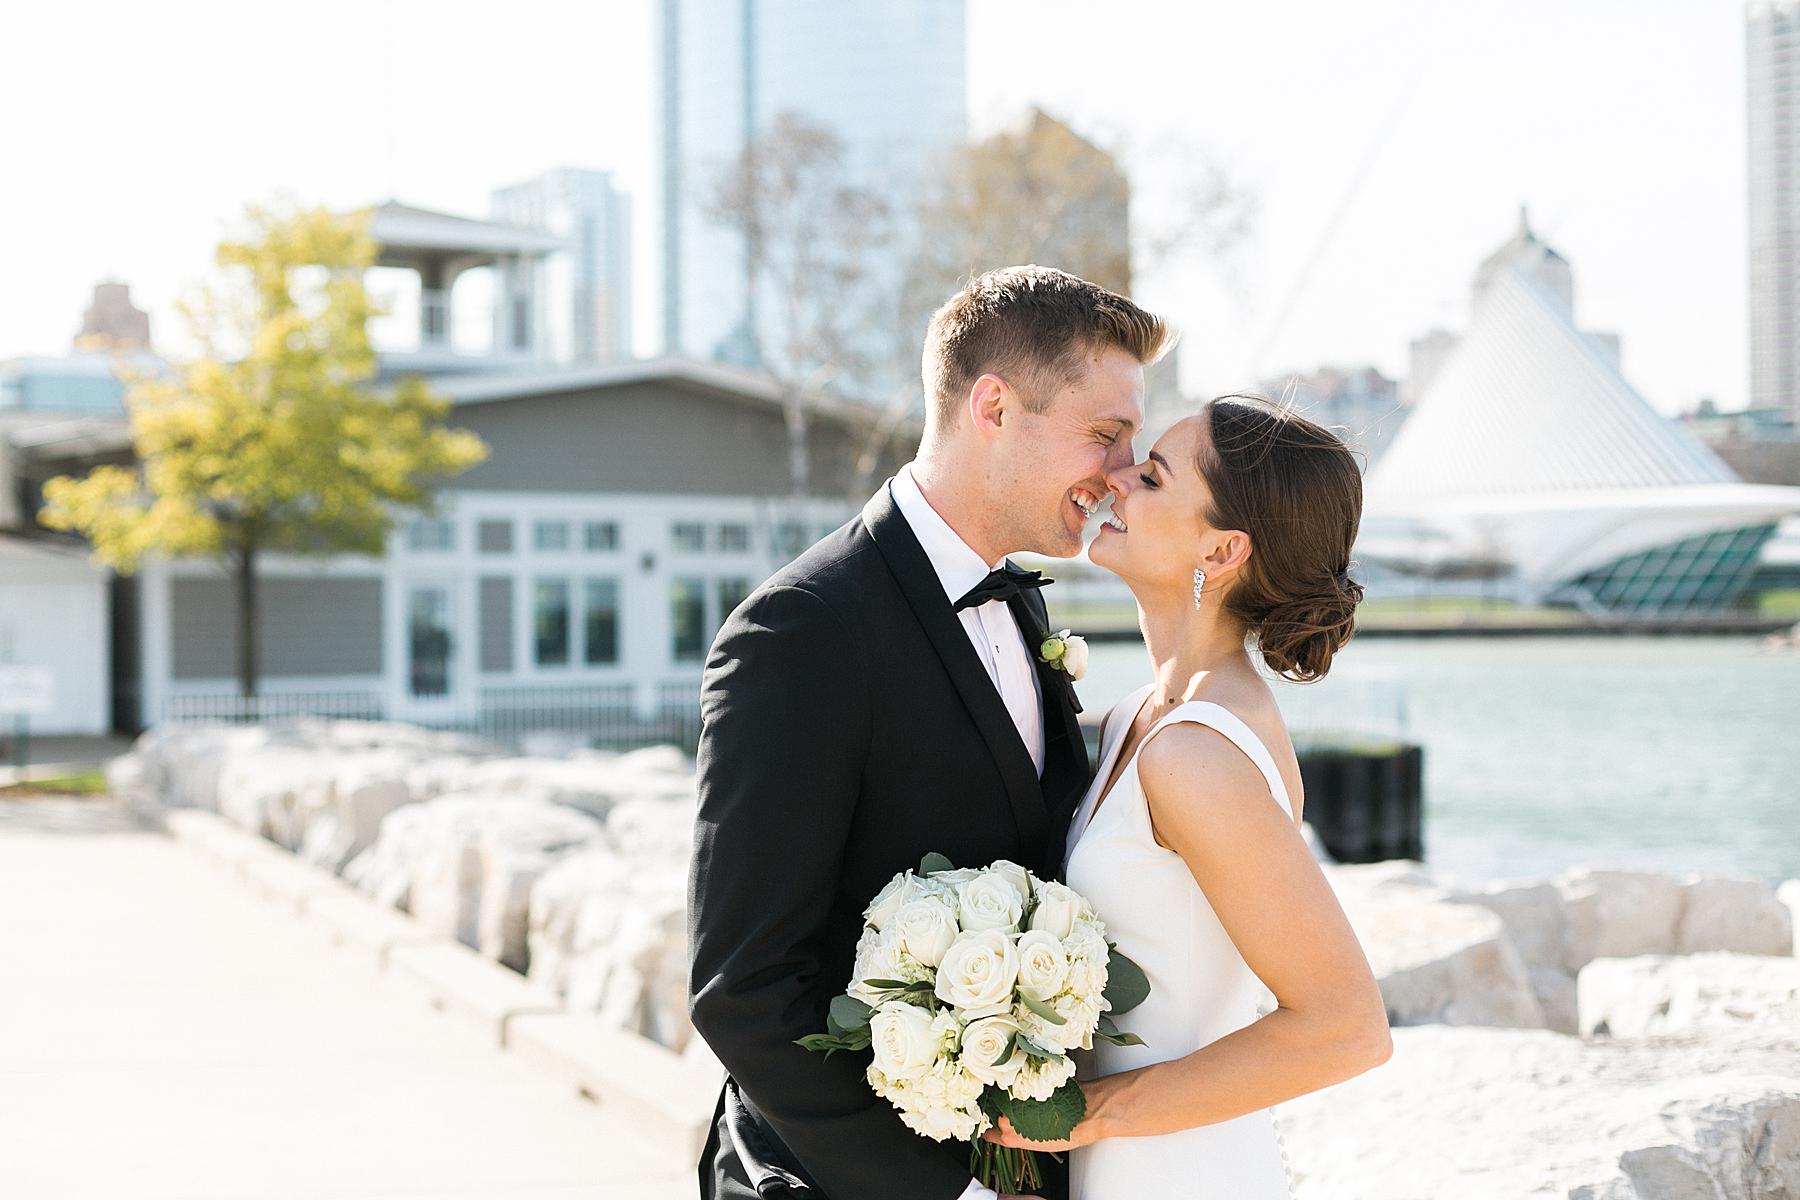 bride and groom couple newlywed portraits along the lakefront art museum and city skyline in downtown milwaukee, wi